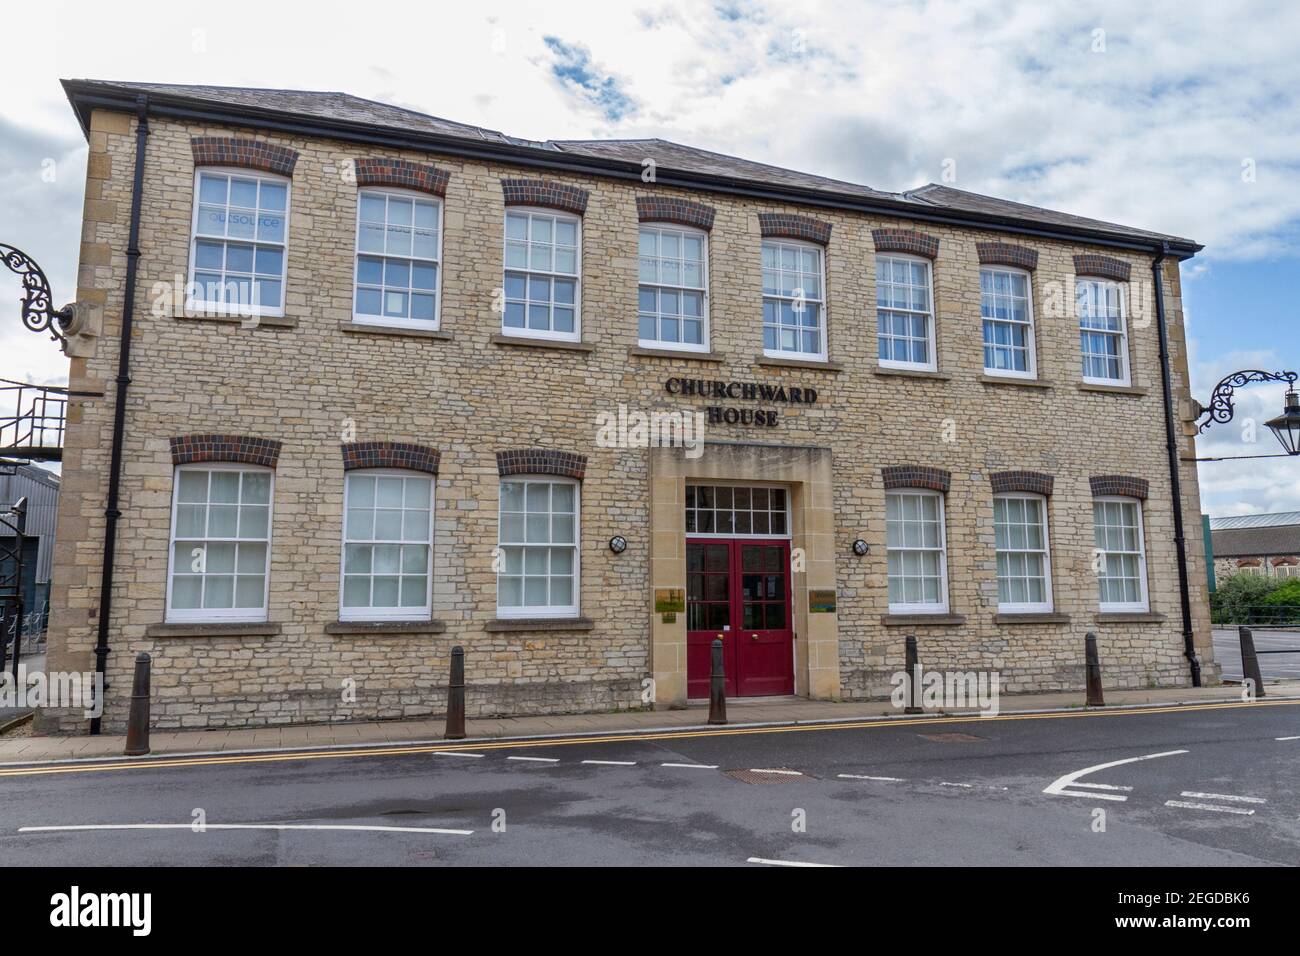 Churchward House, formerly the manager's office to the Great Western Railway Engineering Works in Swindon, Wiltshire, UK. Stock Photo